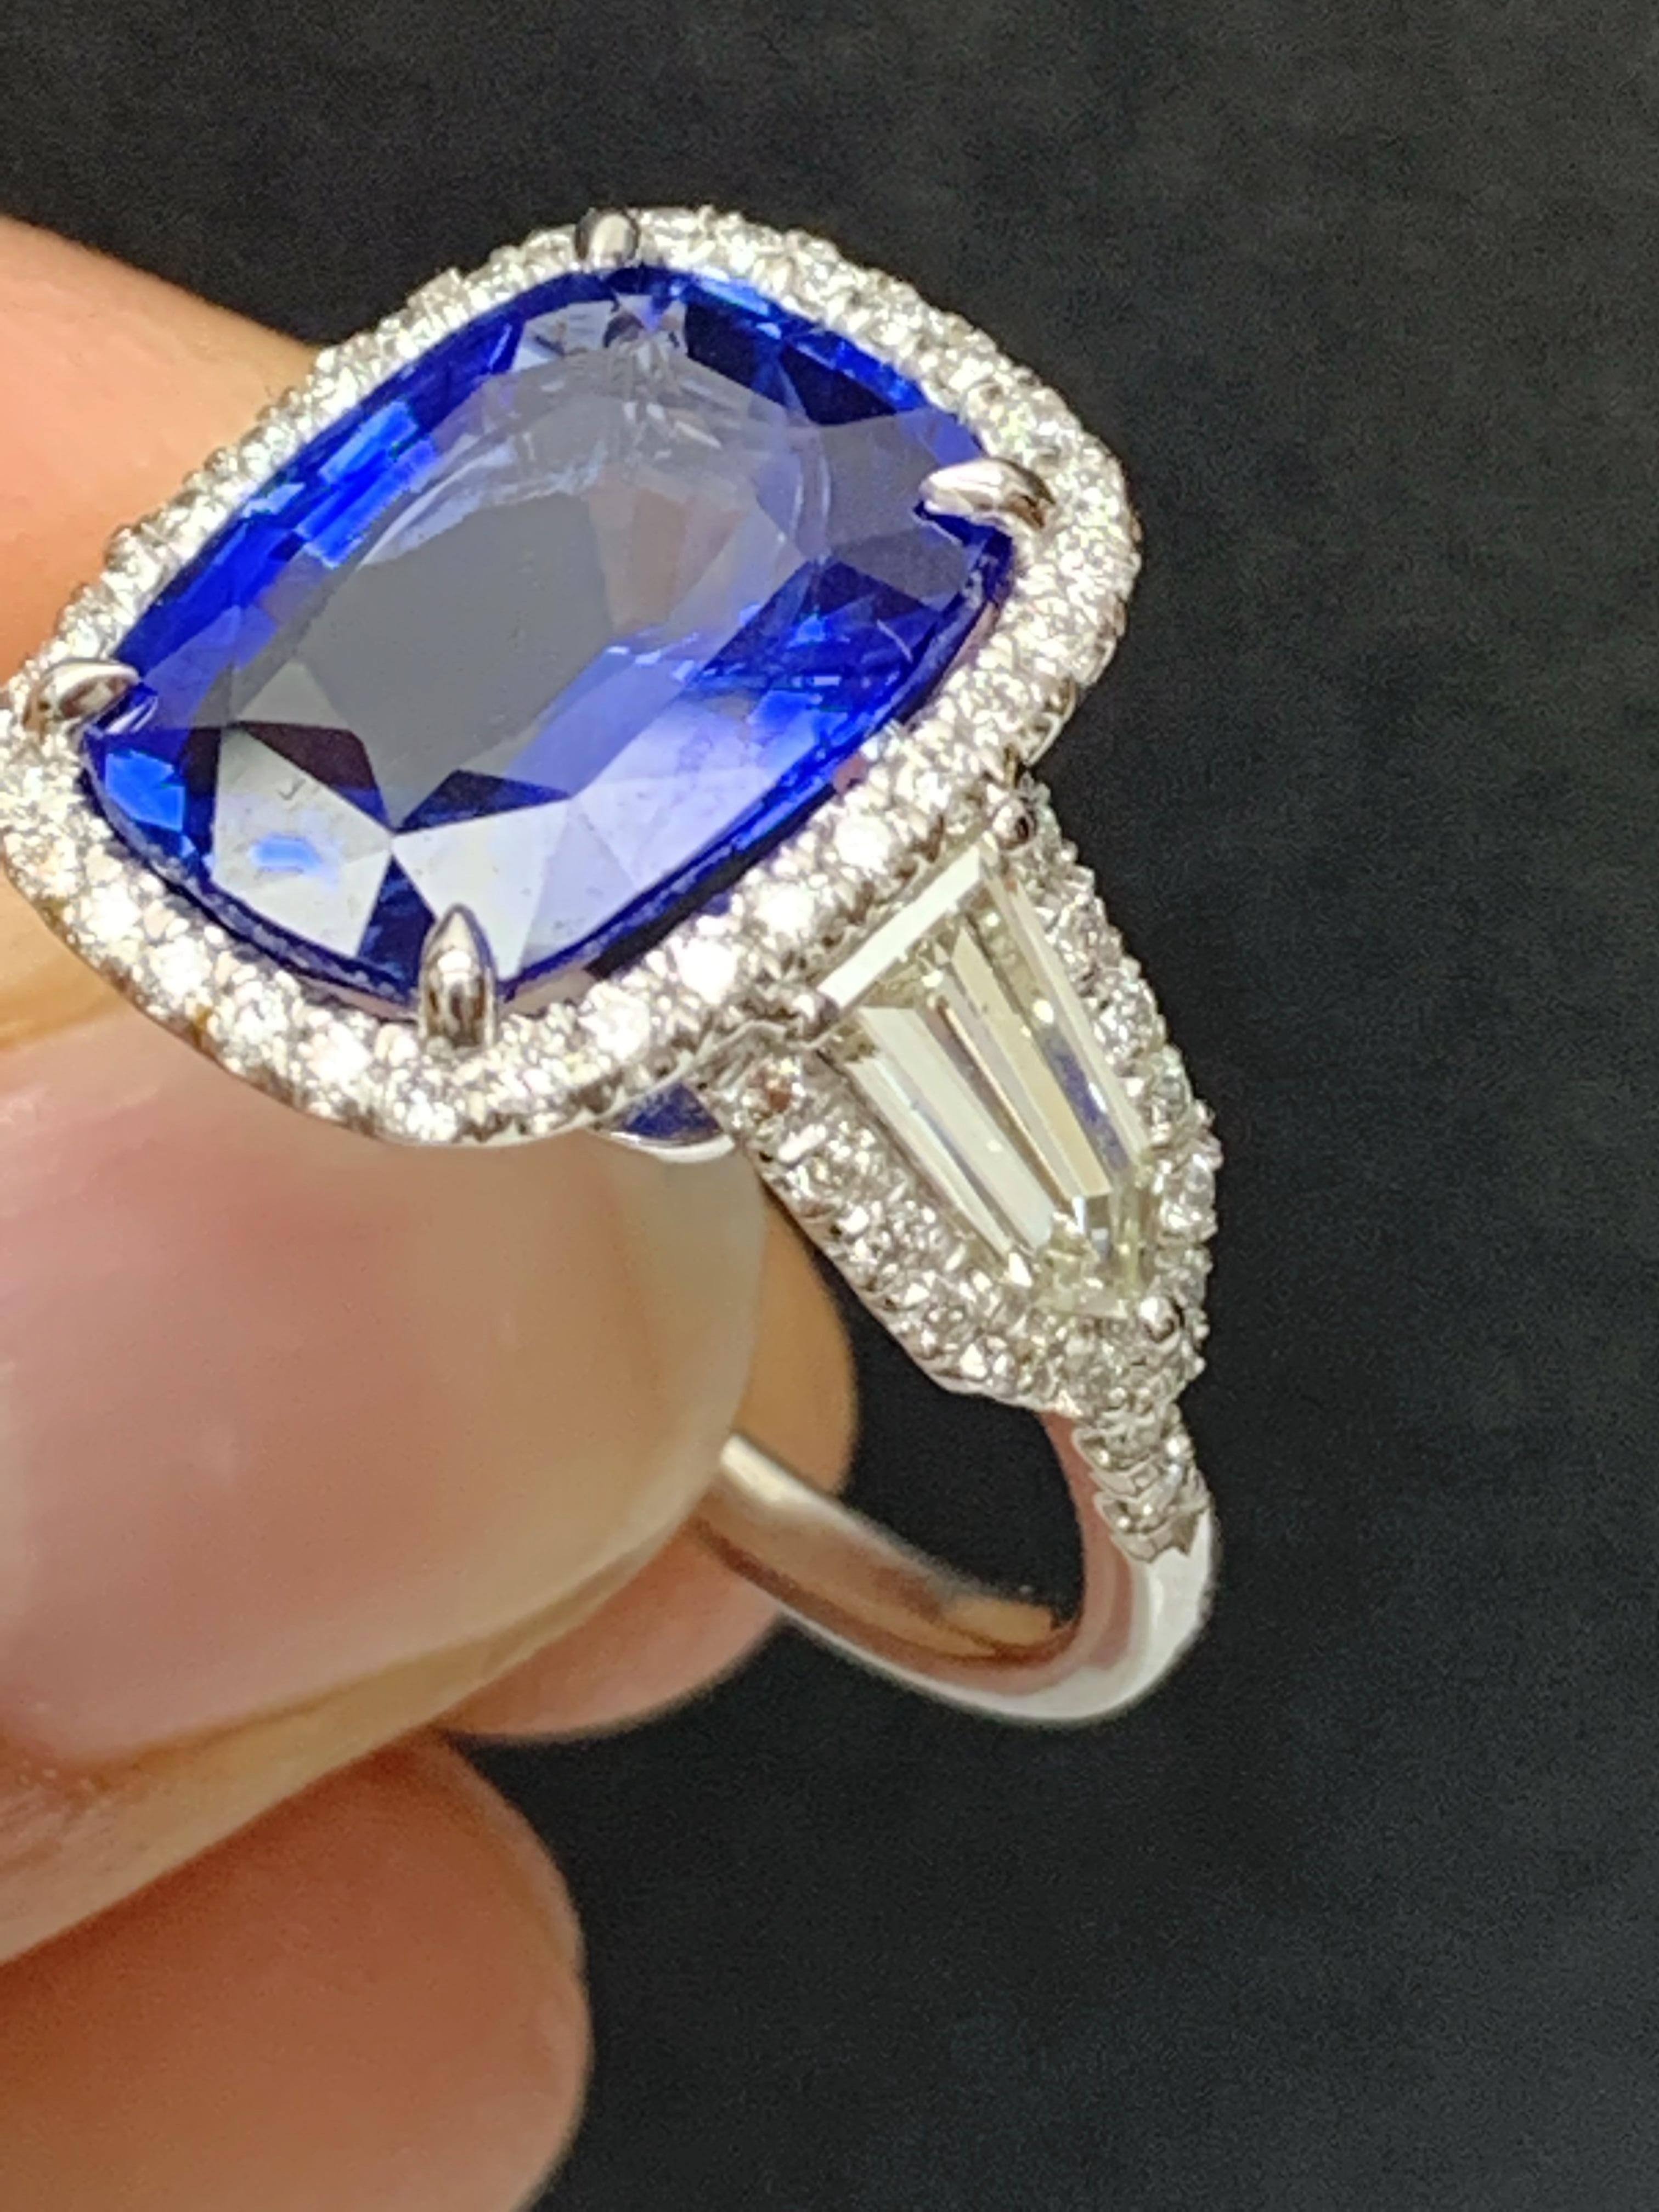 7.51 Carat Cushion Cut Sapphire and Diamond Engagement Ring in Platinum For Sale 5